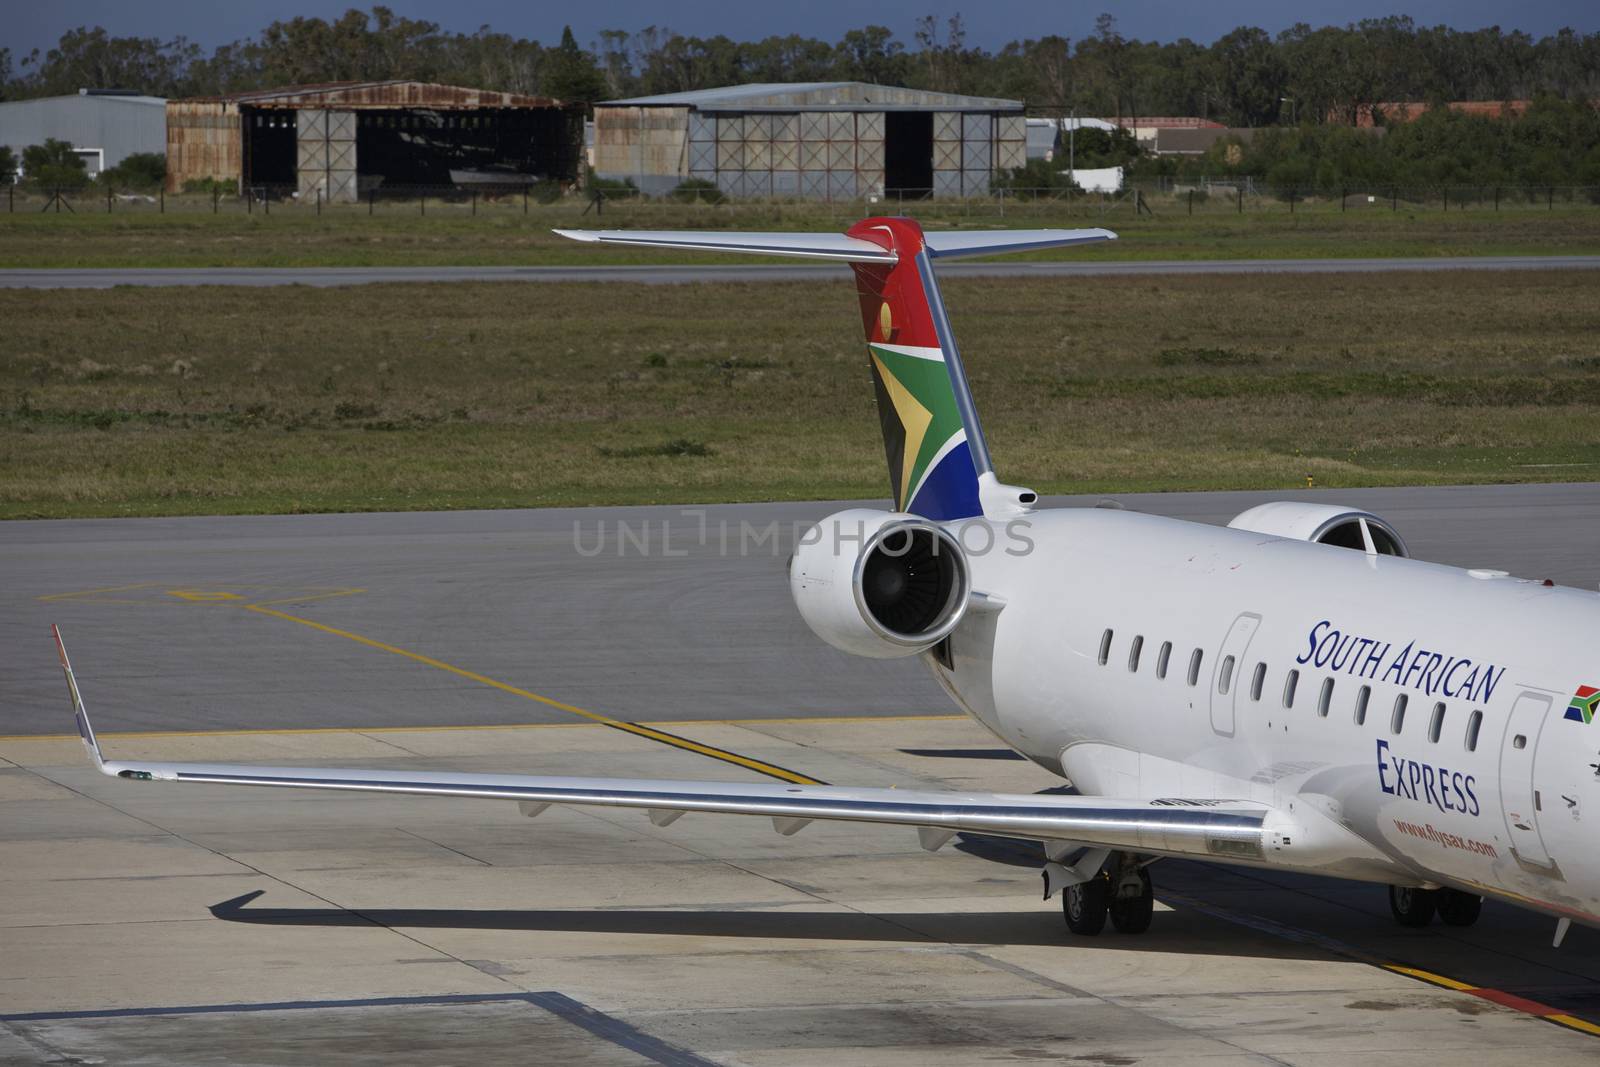 South African Airline by instinia